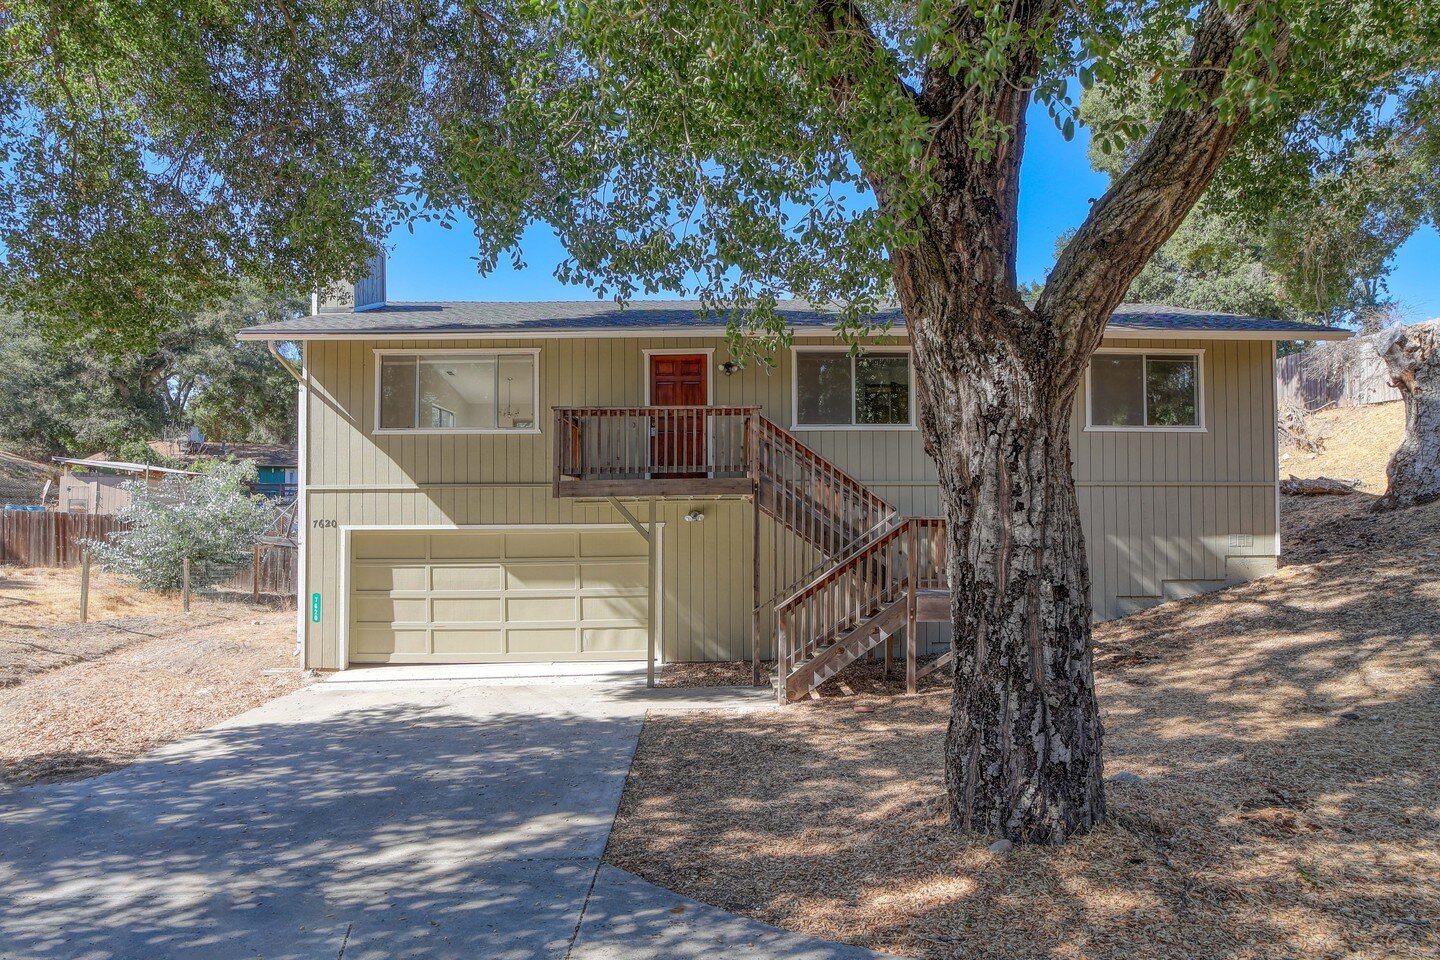 New Listing!

7620 Cristobal | Atascadero, CA 93422

Great westside Atascadero location for this 3 bedroom, 2 bath home featuring over ~1400 sq ft of living space. New roof, new interior paint and carpet, new vinyl plank flooring in the kitchen and e